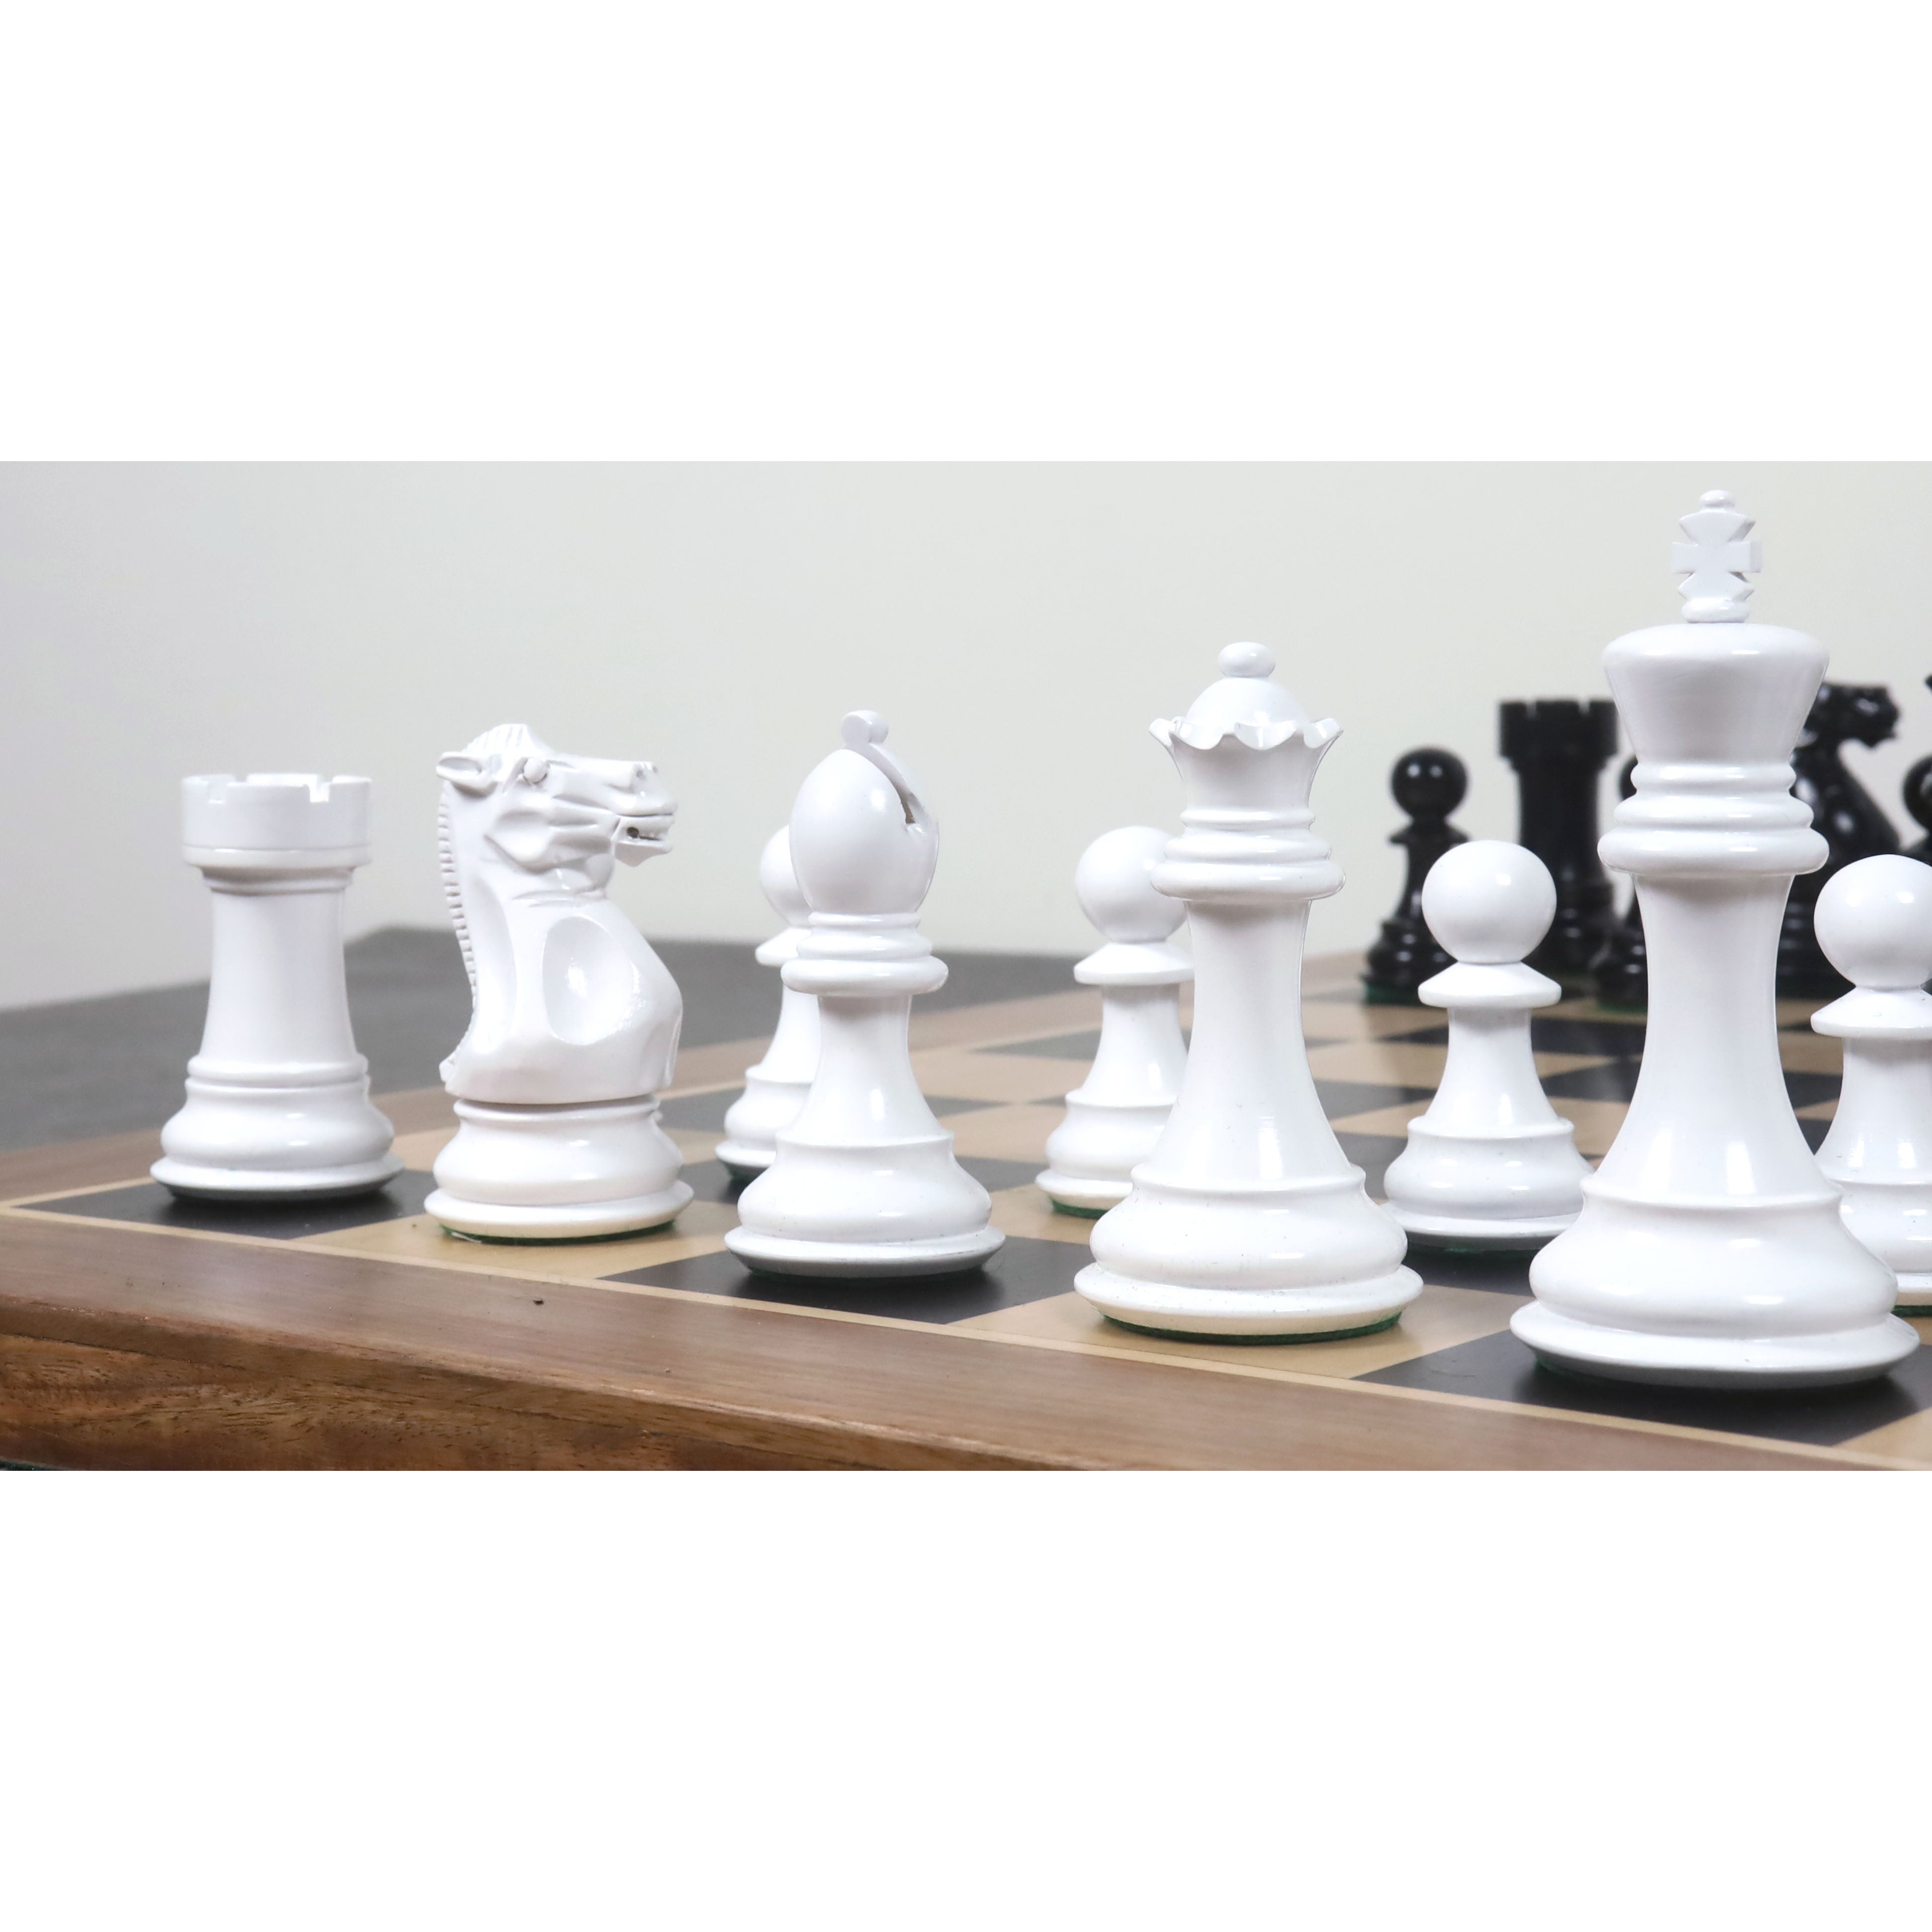 Combo of 4.1" Pro Staunton Black & White Lacquered Wooden Chess Pieces with 23" Large Ebony & Maple Wood Chessboard and Storage Box